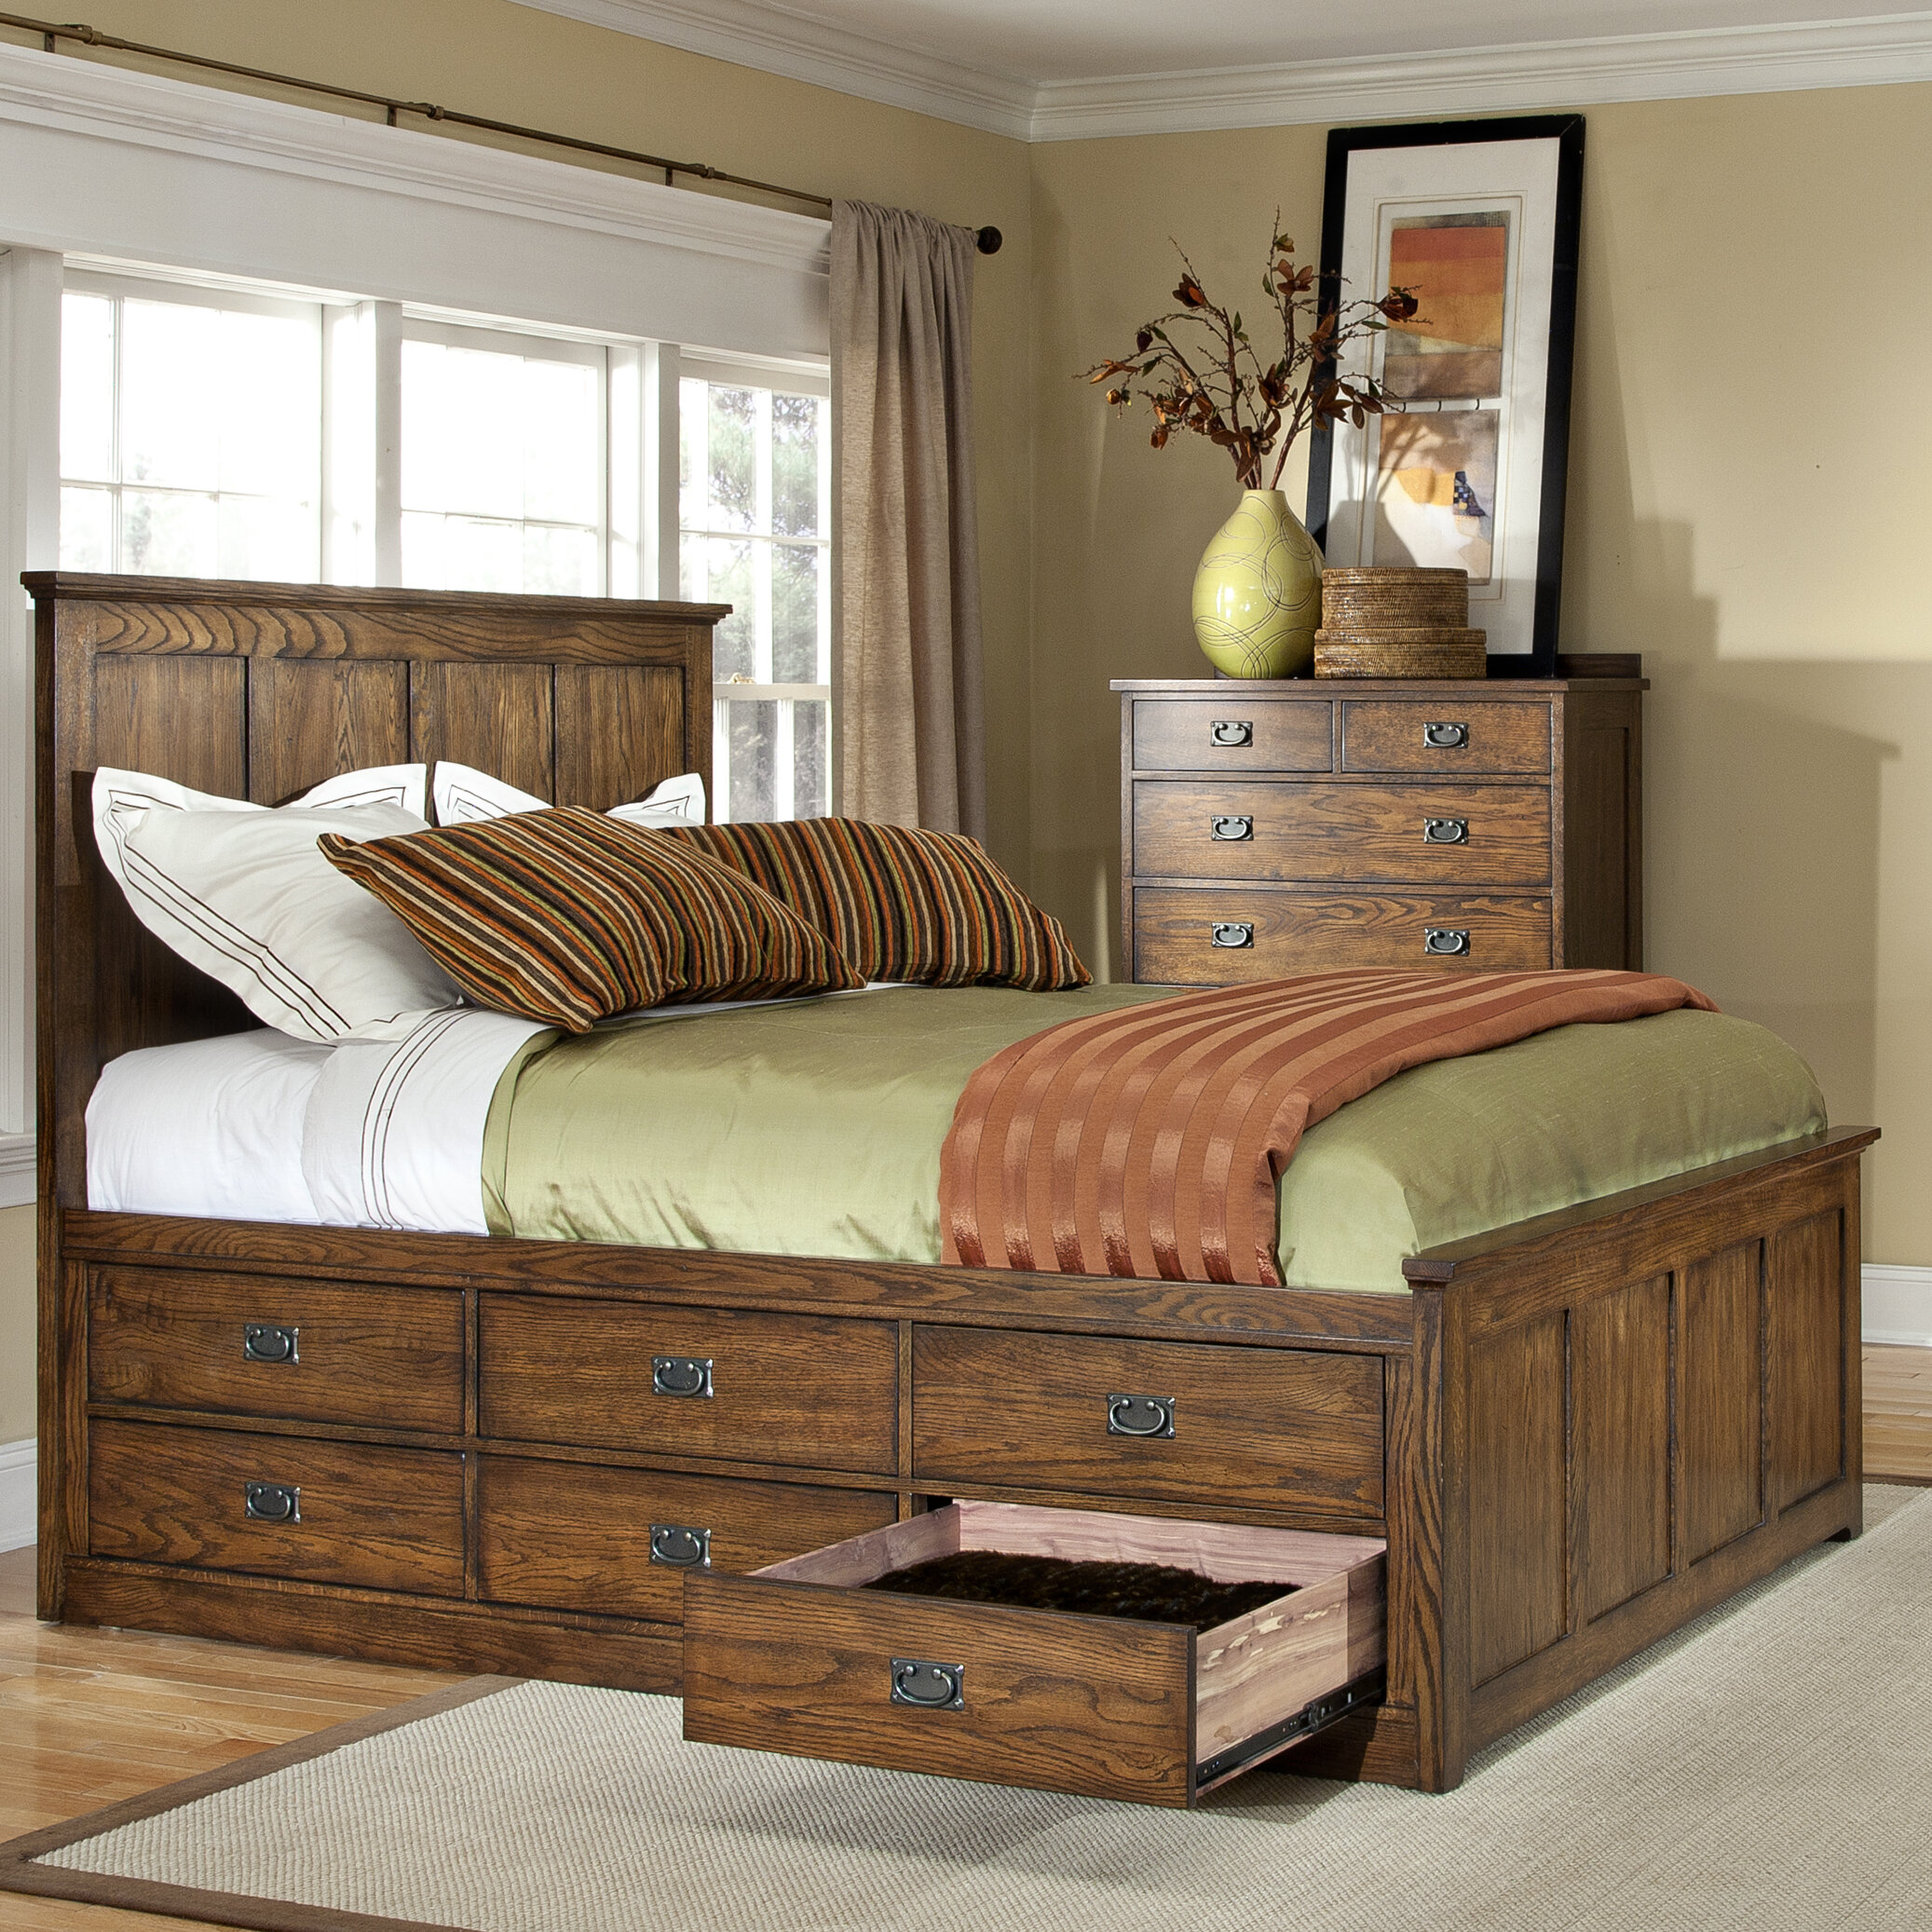 Bed With Drawers Underneath Visualhunt, Double Bed Frame With Drawers Underneath